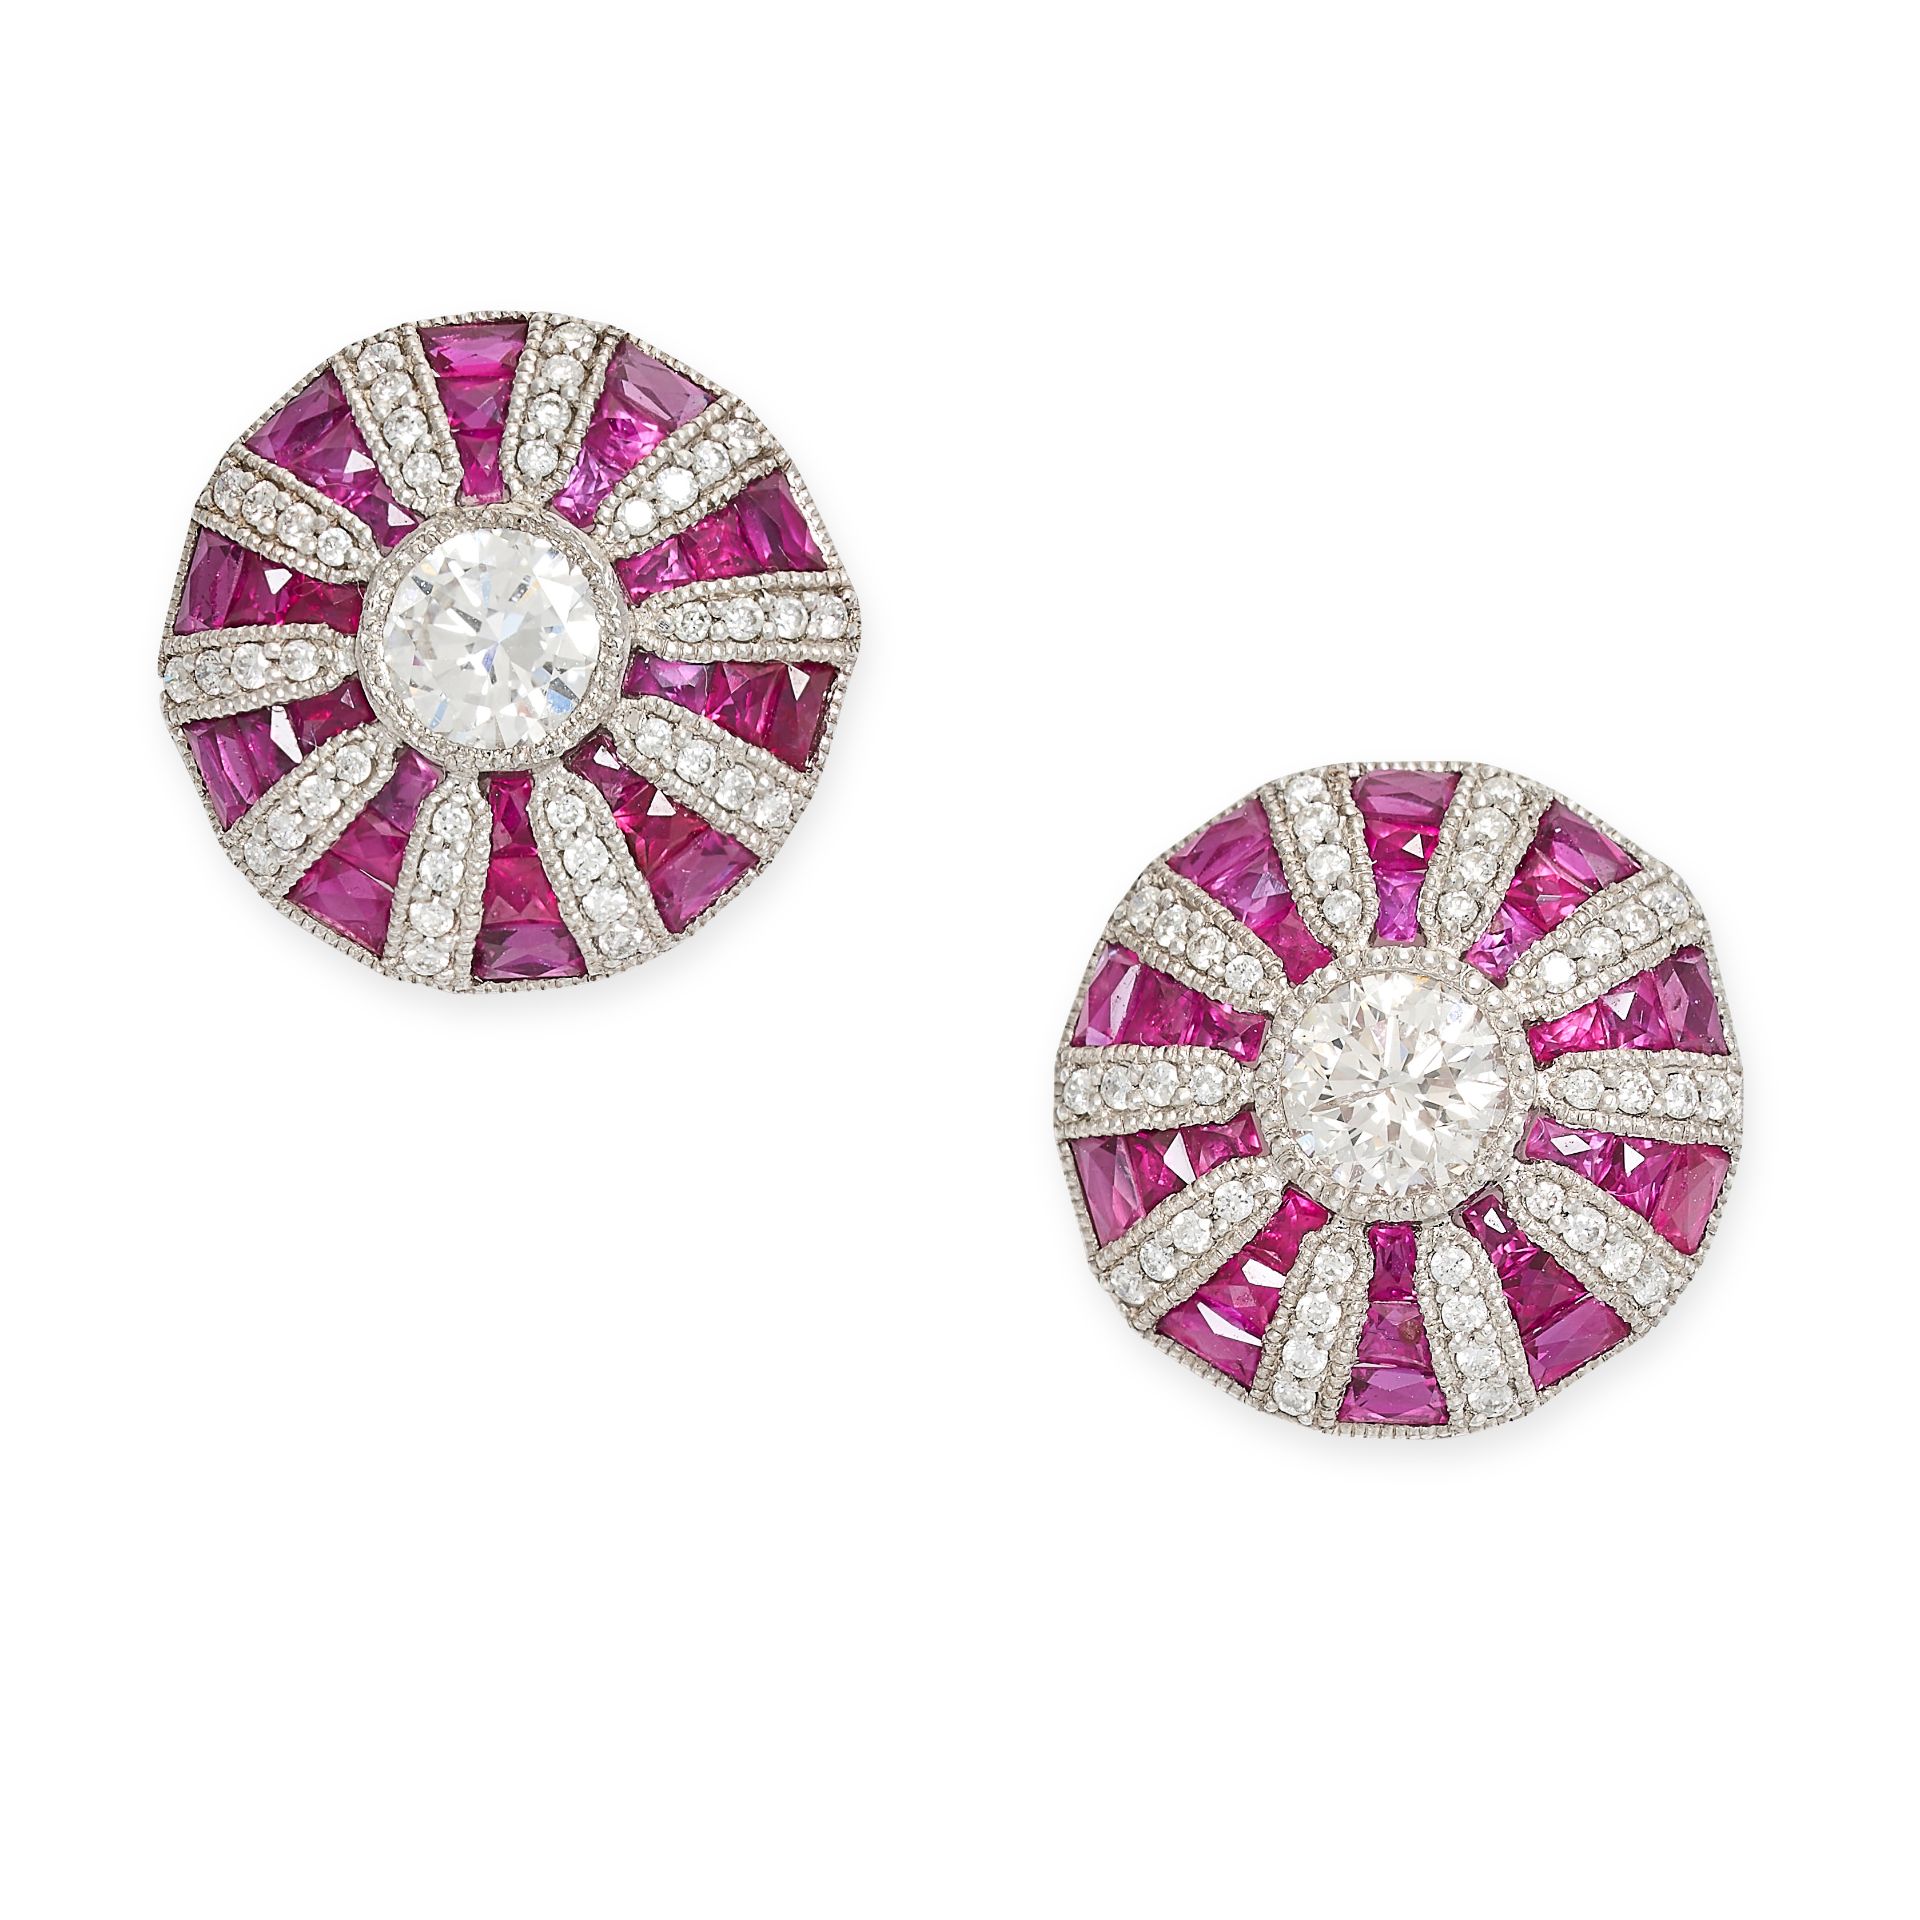 A PAIR OF RUBY AND DIAMOND STUD EARRINGS in platinum, the circular faces each set with a central